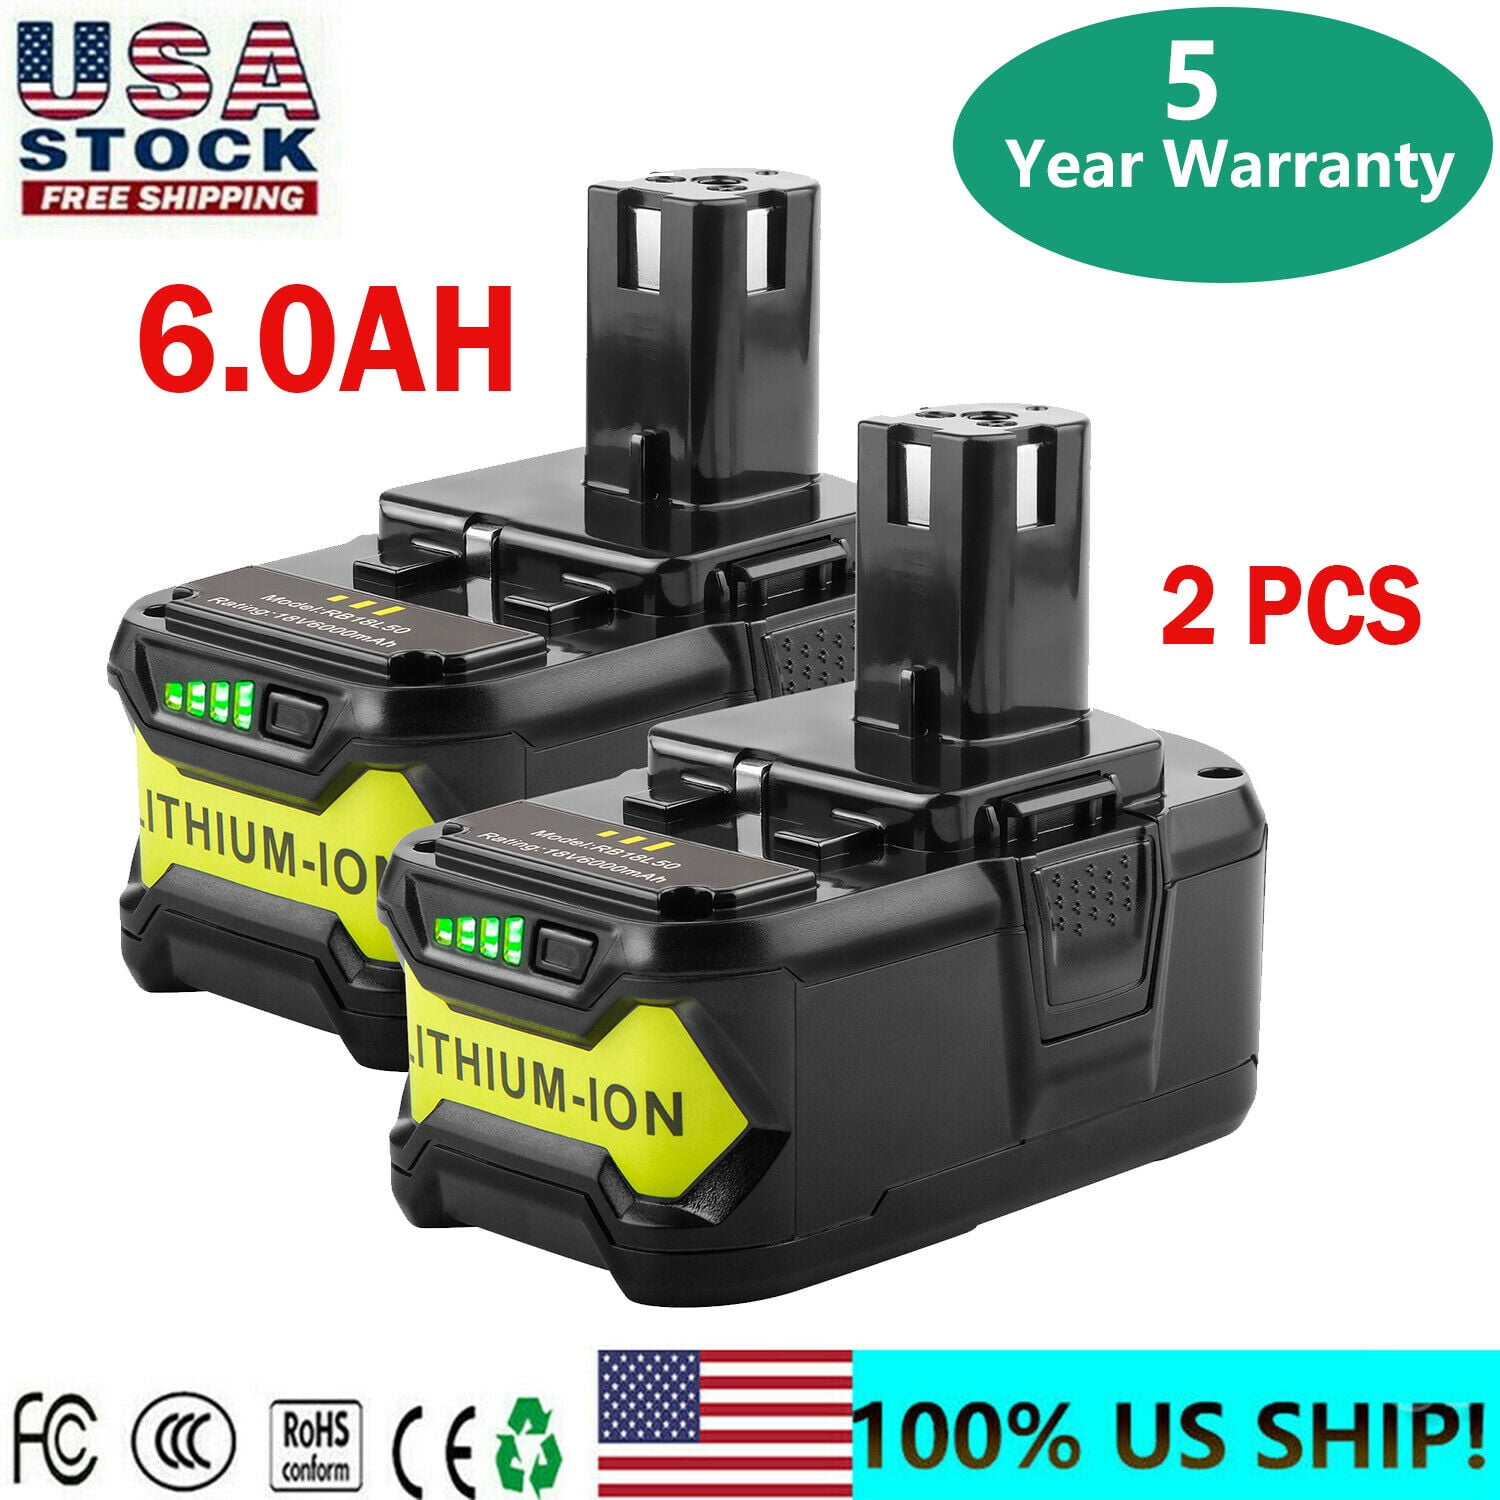 Plus 6.0Ah High Capacity Lithium-ion Battery NEW For RYOBI P108 18V 18 Volt One 